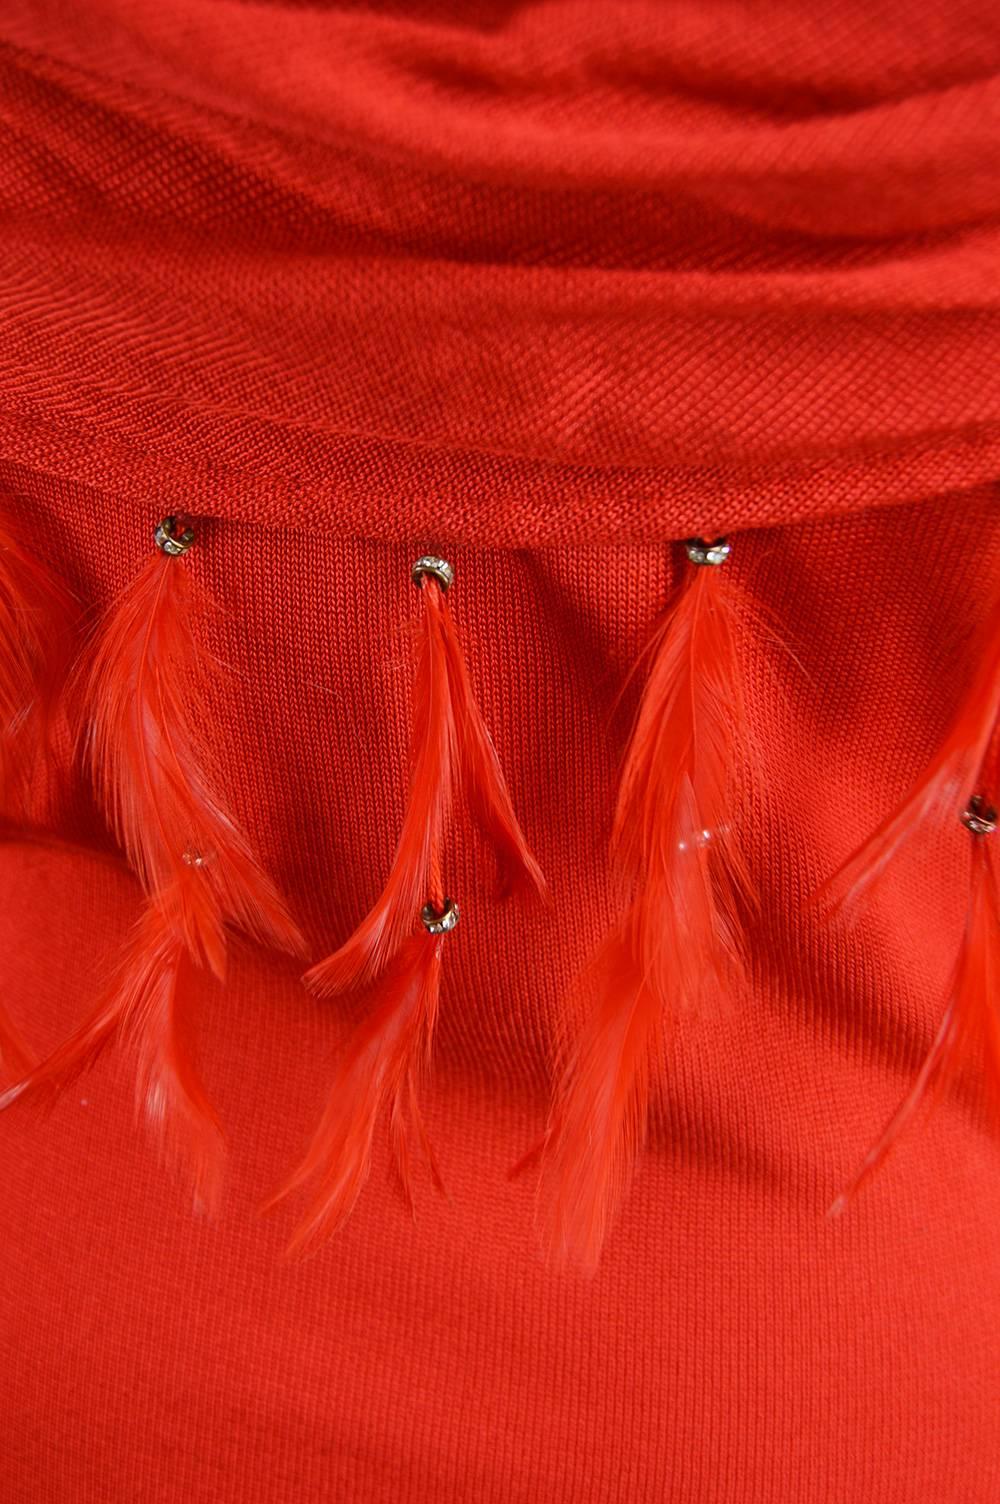 Gianni Versace Vintage Red Rayon Knit Off the Shoulder Feather Trim Dress, 1980s 3